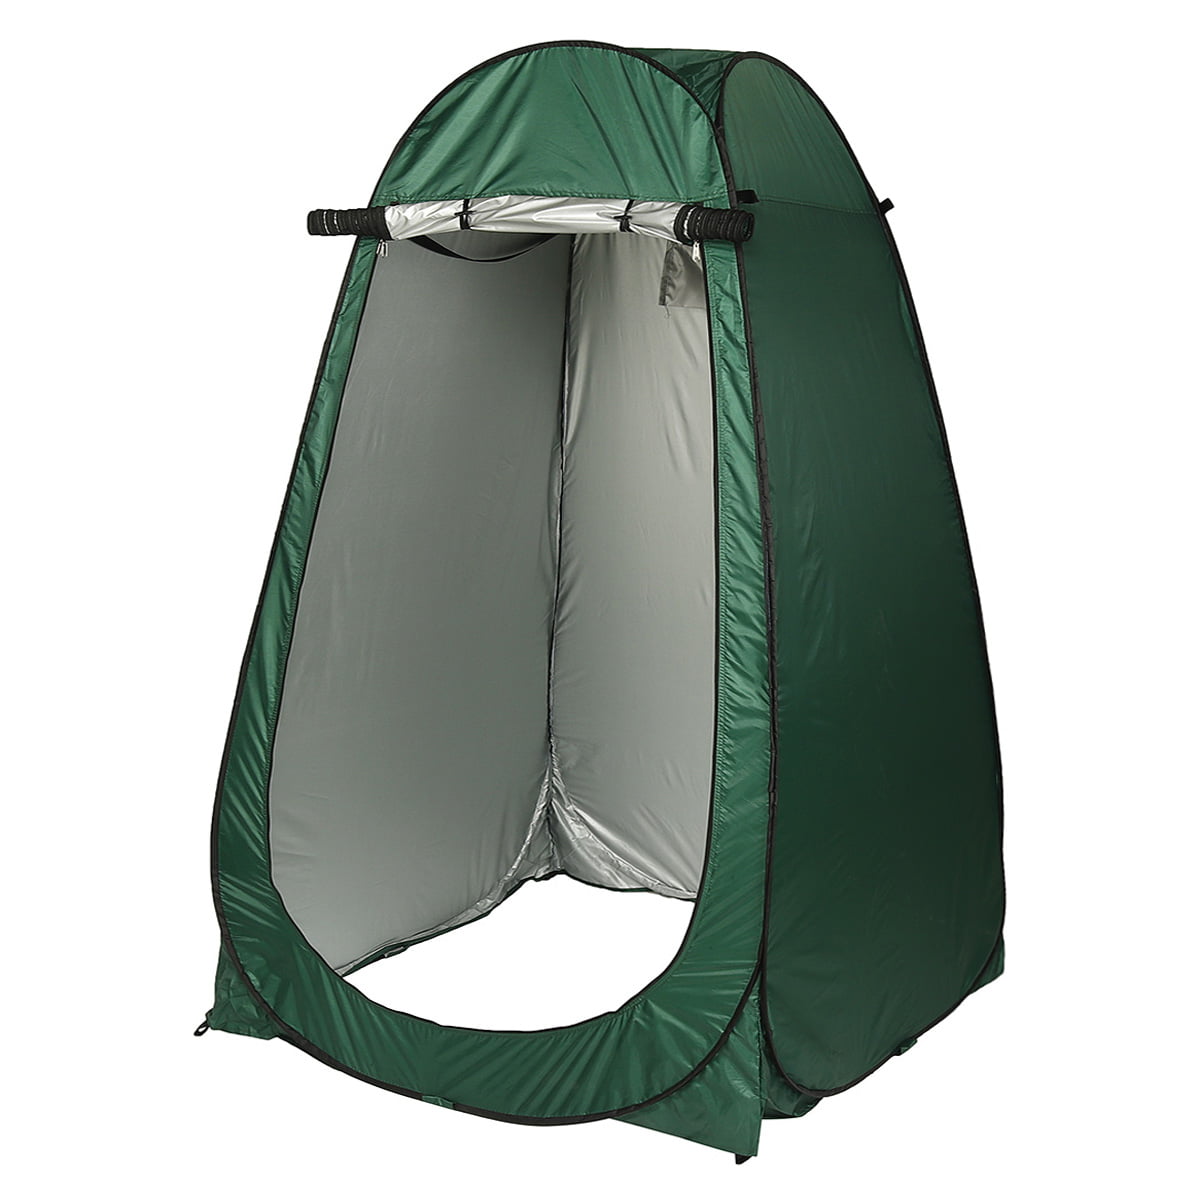 120x120x190cm 190T Camping Changing Shower Toilet Tent with Carry Bag Ground Peg 